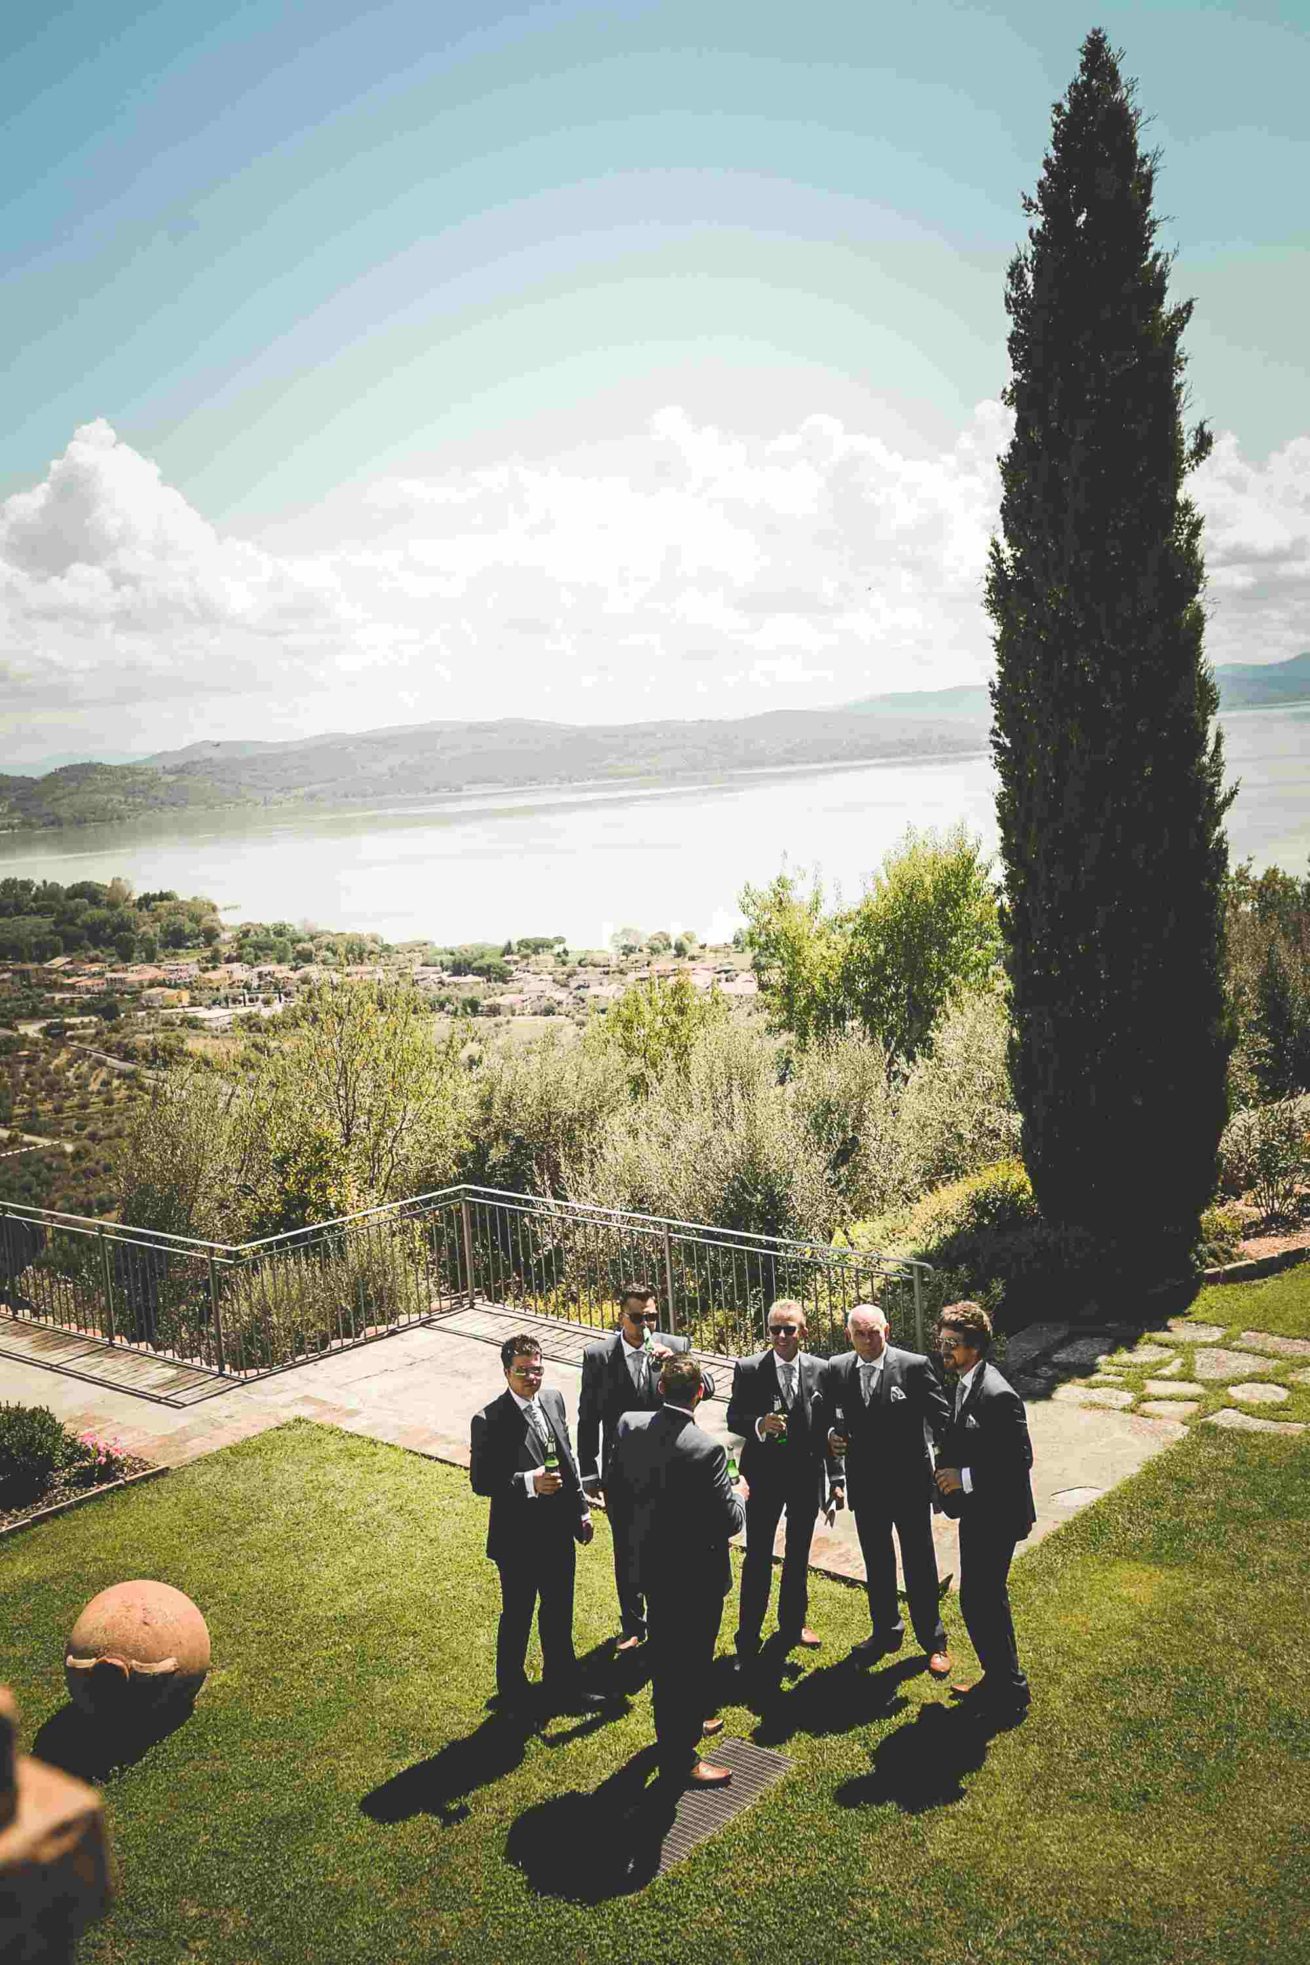 Garden villa wedding Italy. Lads relaxing drink before the ceremony...